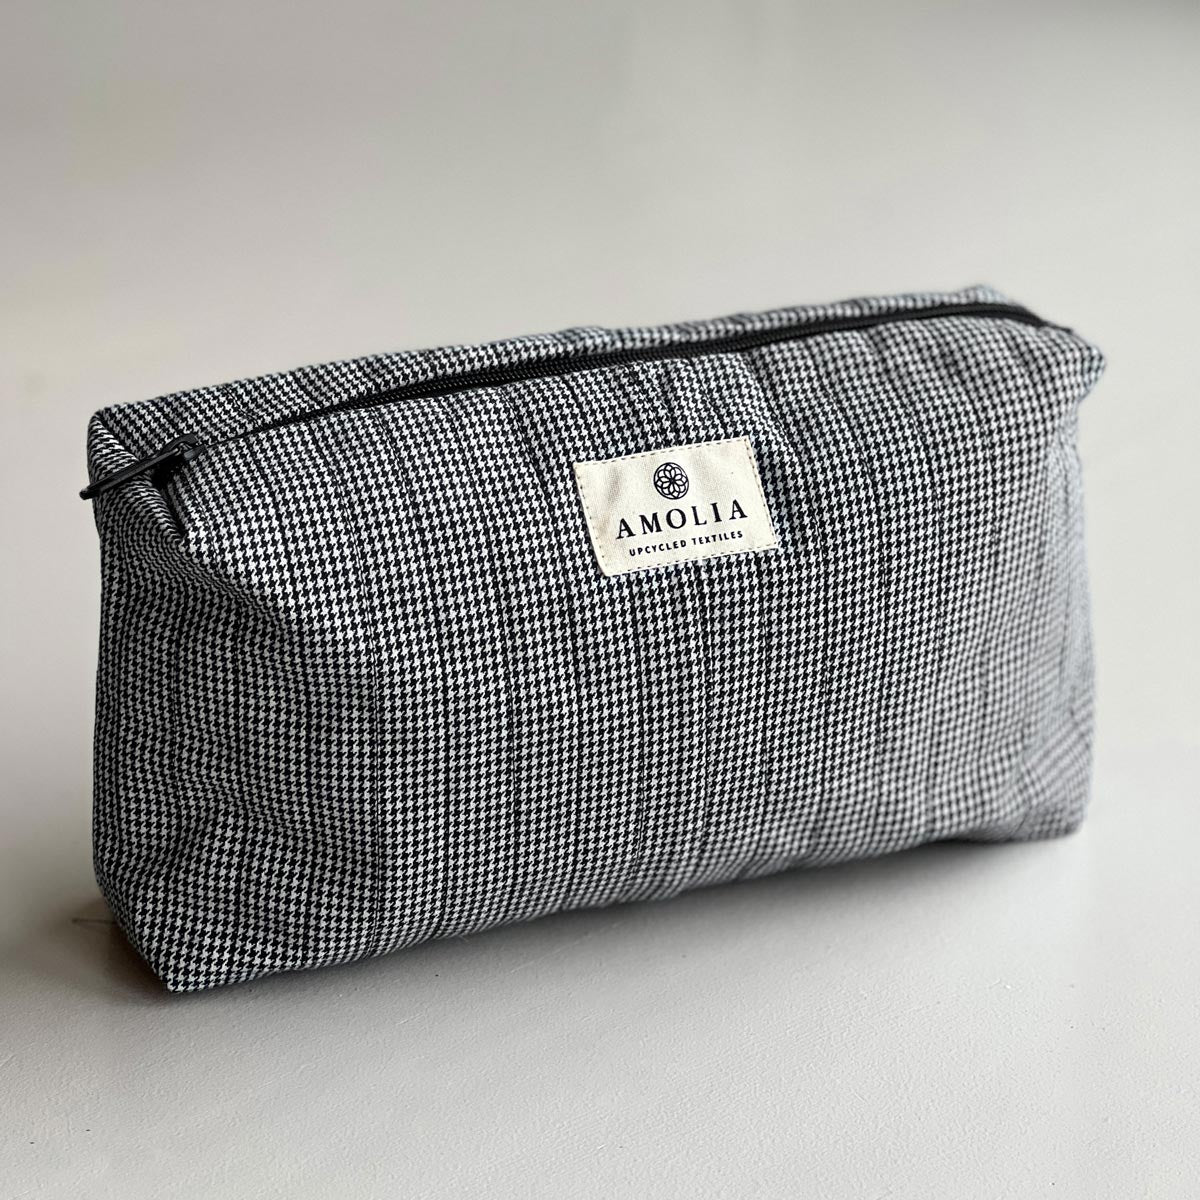 Upcycled Toiletry bag, small, houndstooth